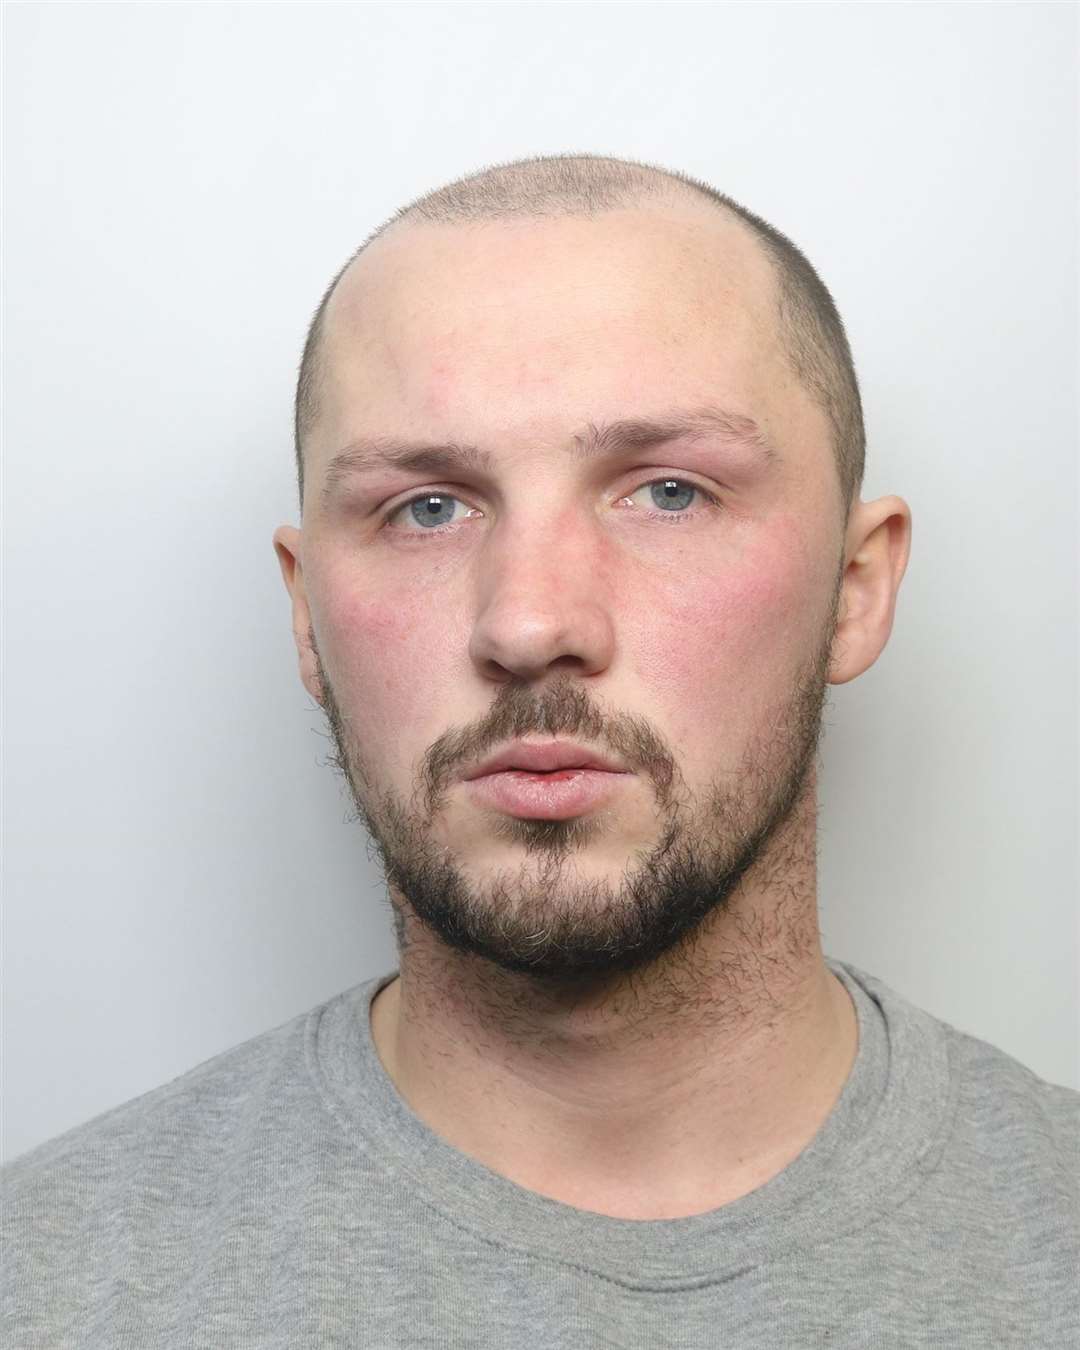 Lewis Haines is beginning a life sentence for murdering Lily Sullivan (Dyfed-Powys Police/PA)